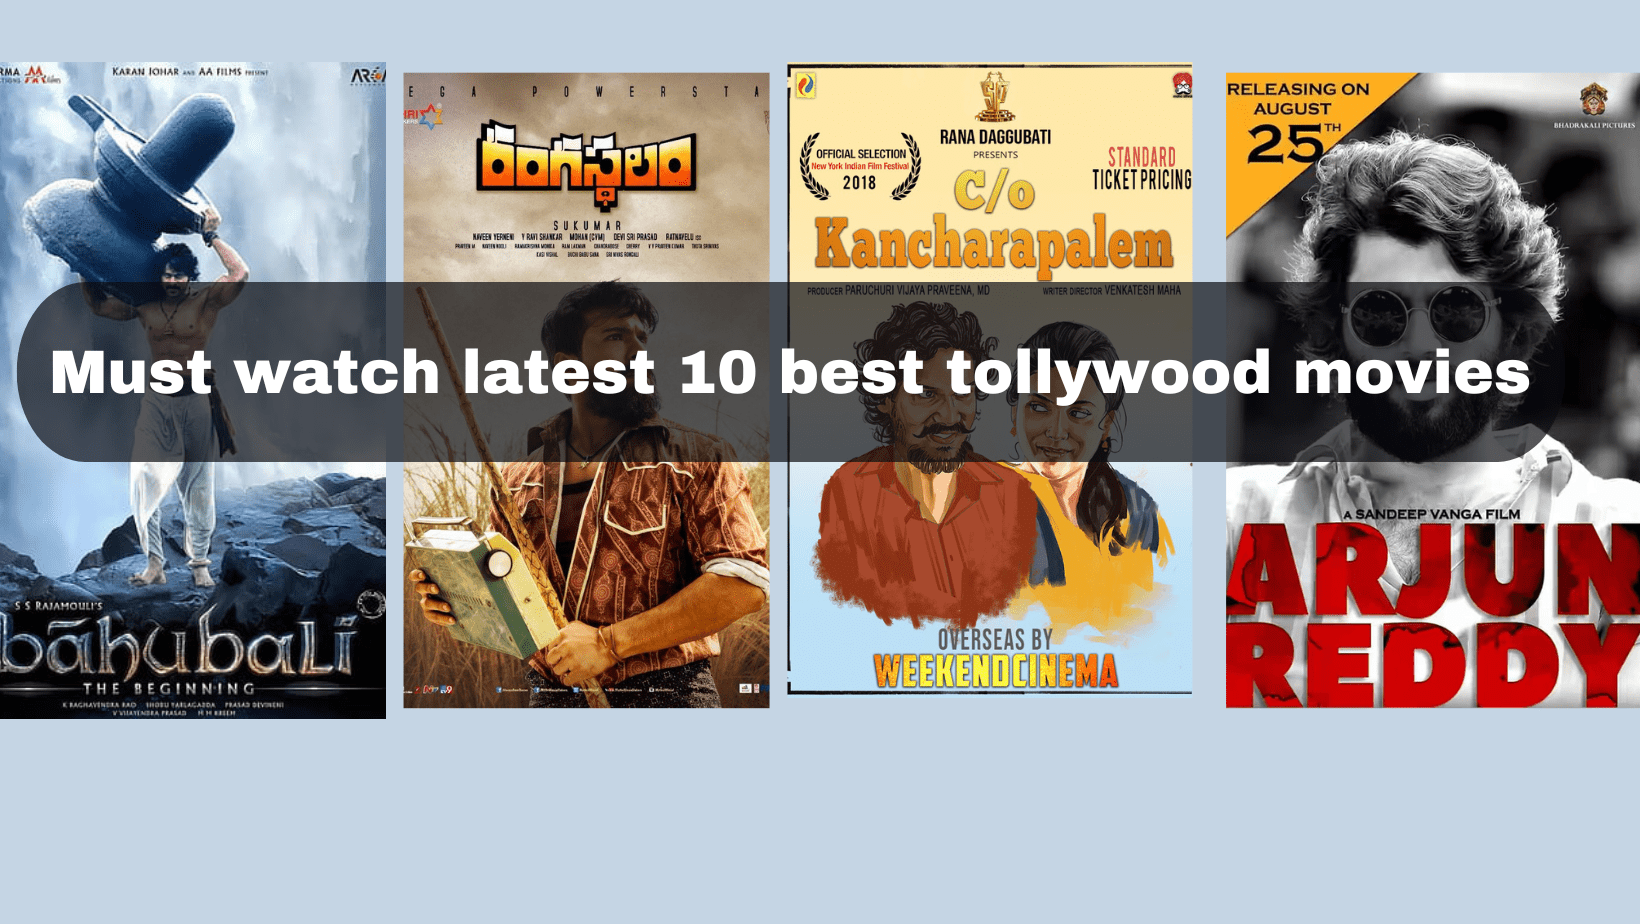 Must watch latest 10 best tollywood movies